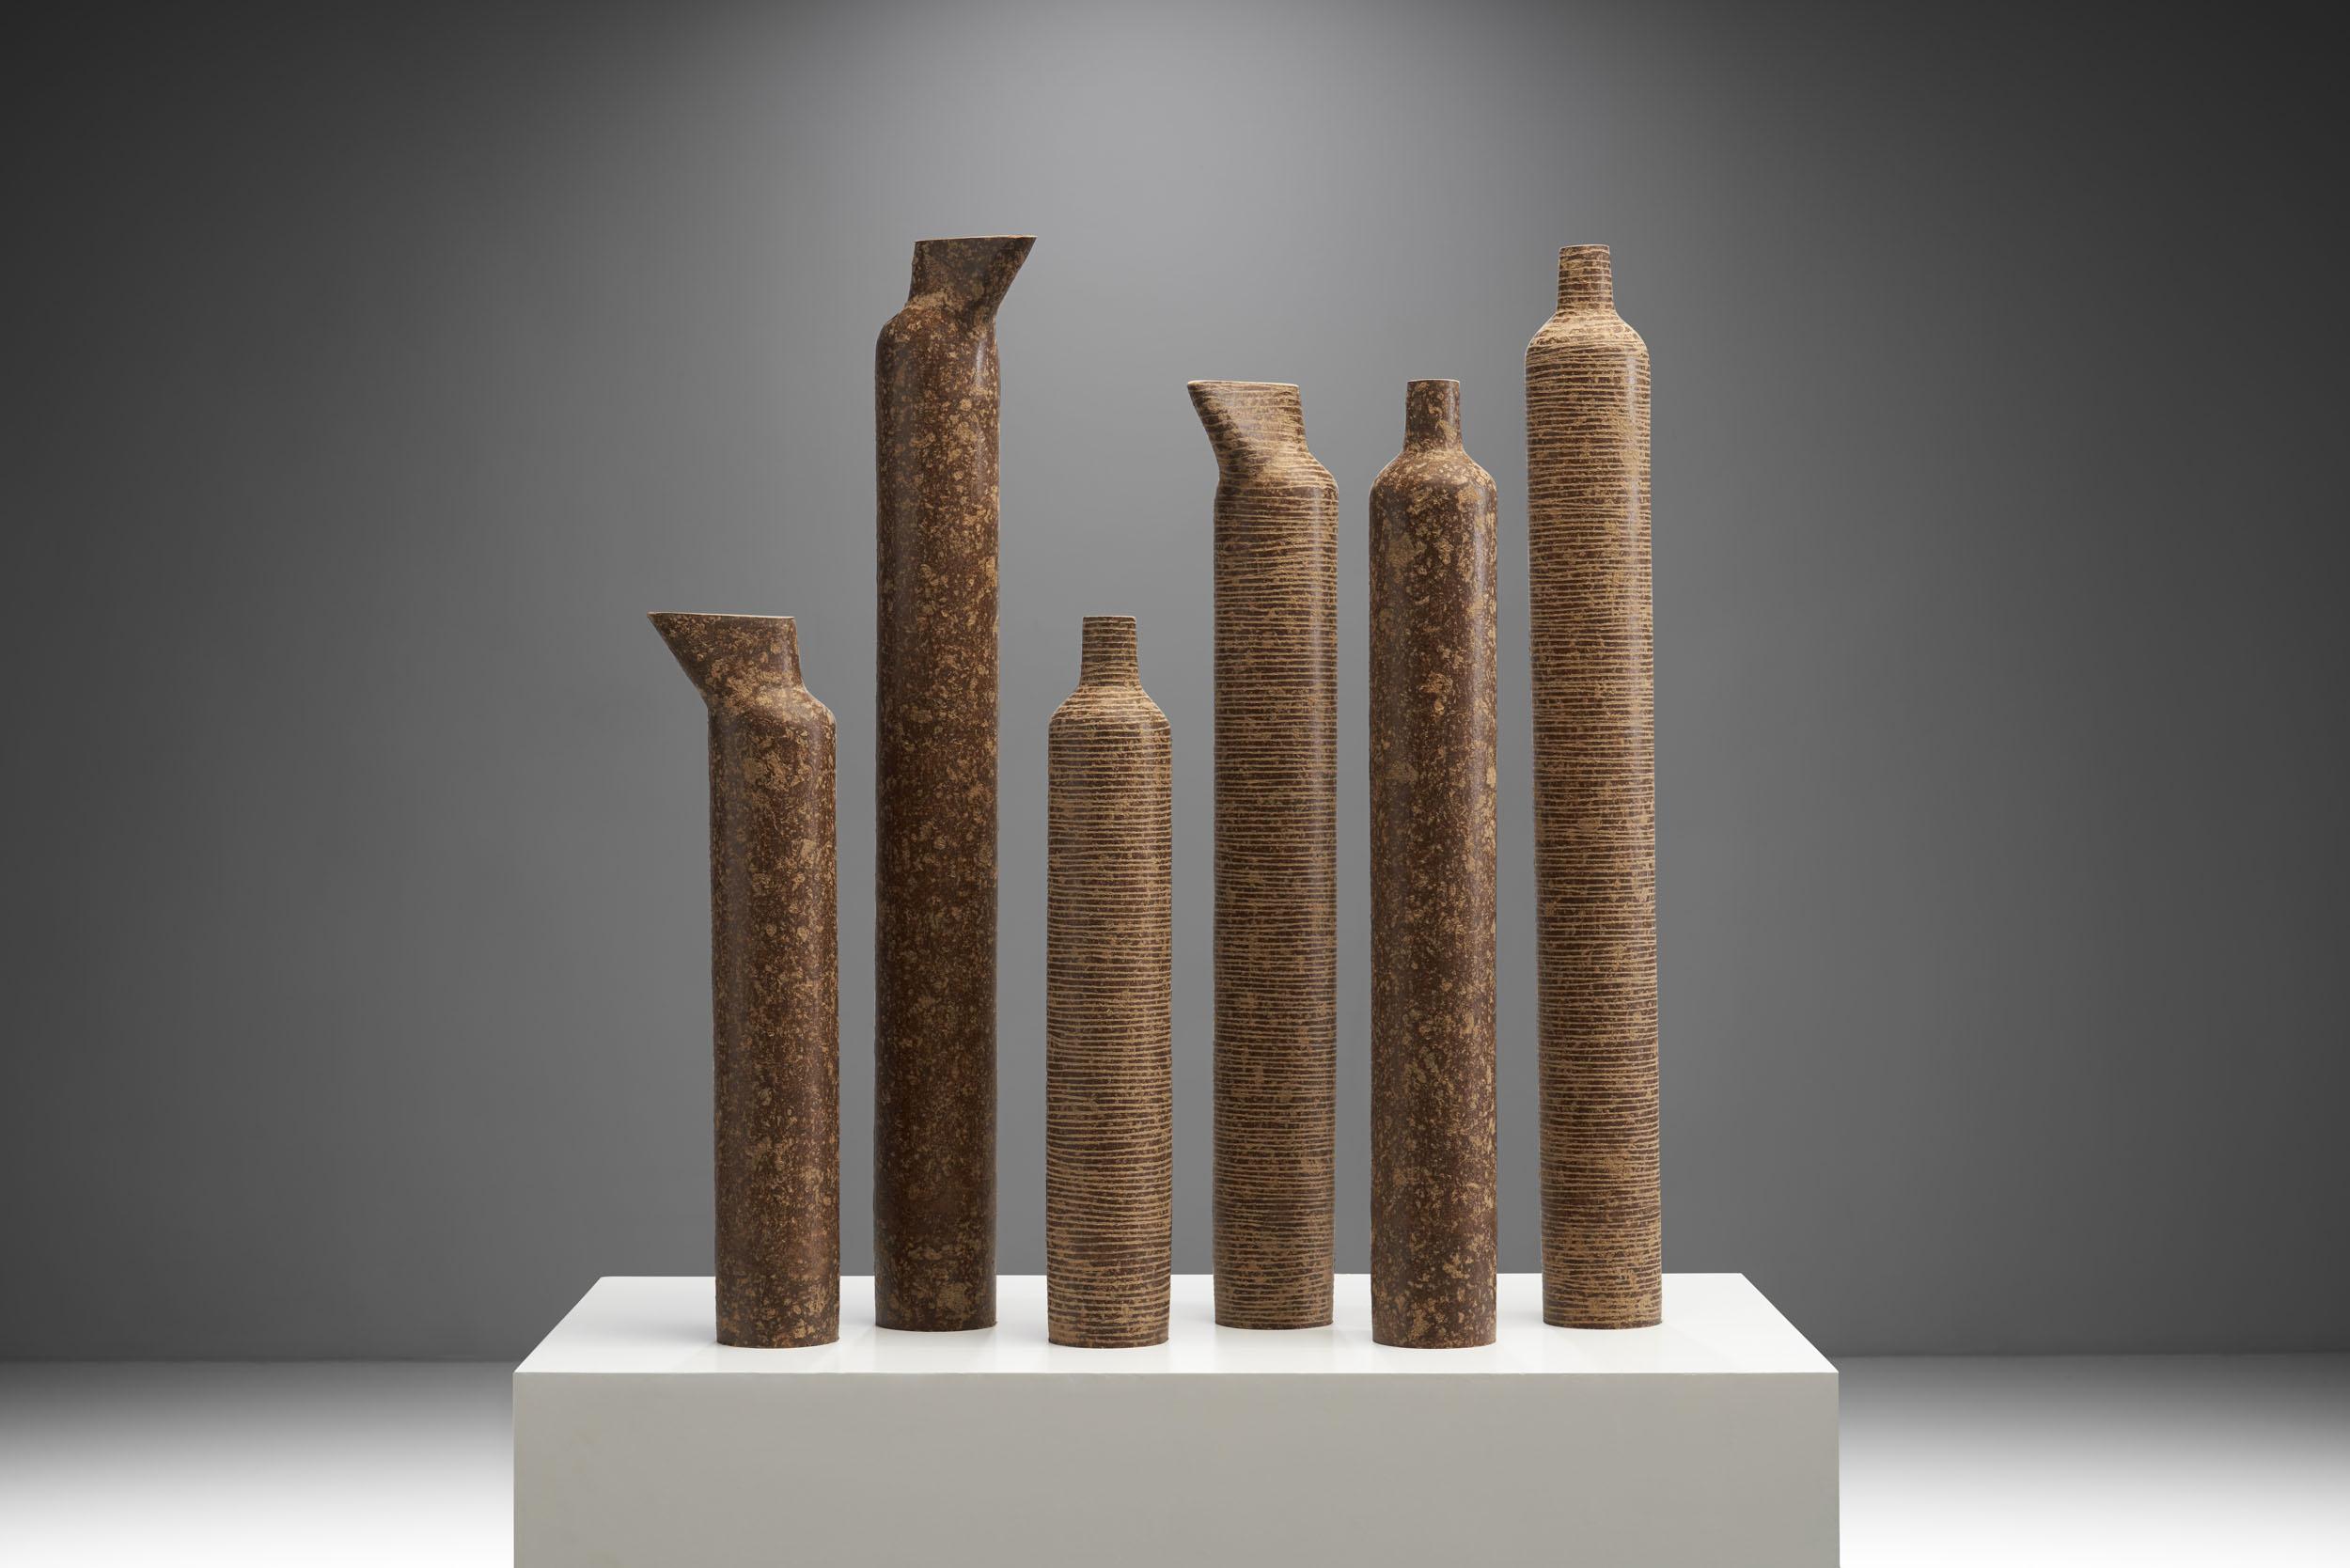 These diverse “Anfora” vases by contemporary Brazilian artist Domingos Tótora are prime examples of the artist’s ars poetica: “I’m a mix of artist, designer, and craftsman.” Additionally, the environmentally conscious artist creates his sculptural